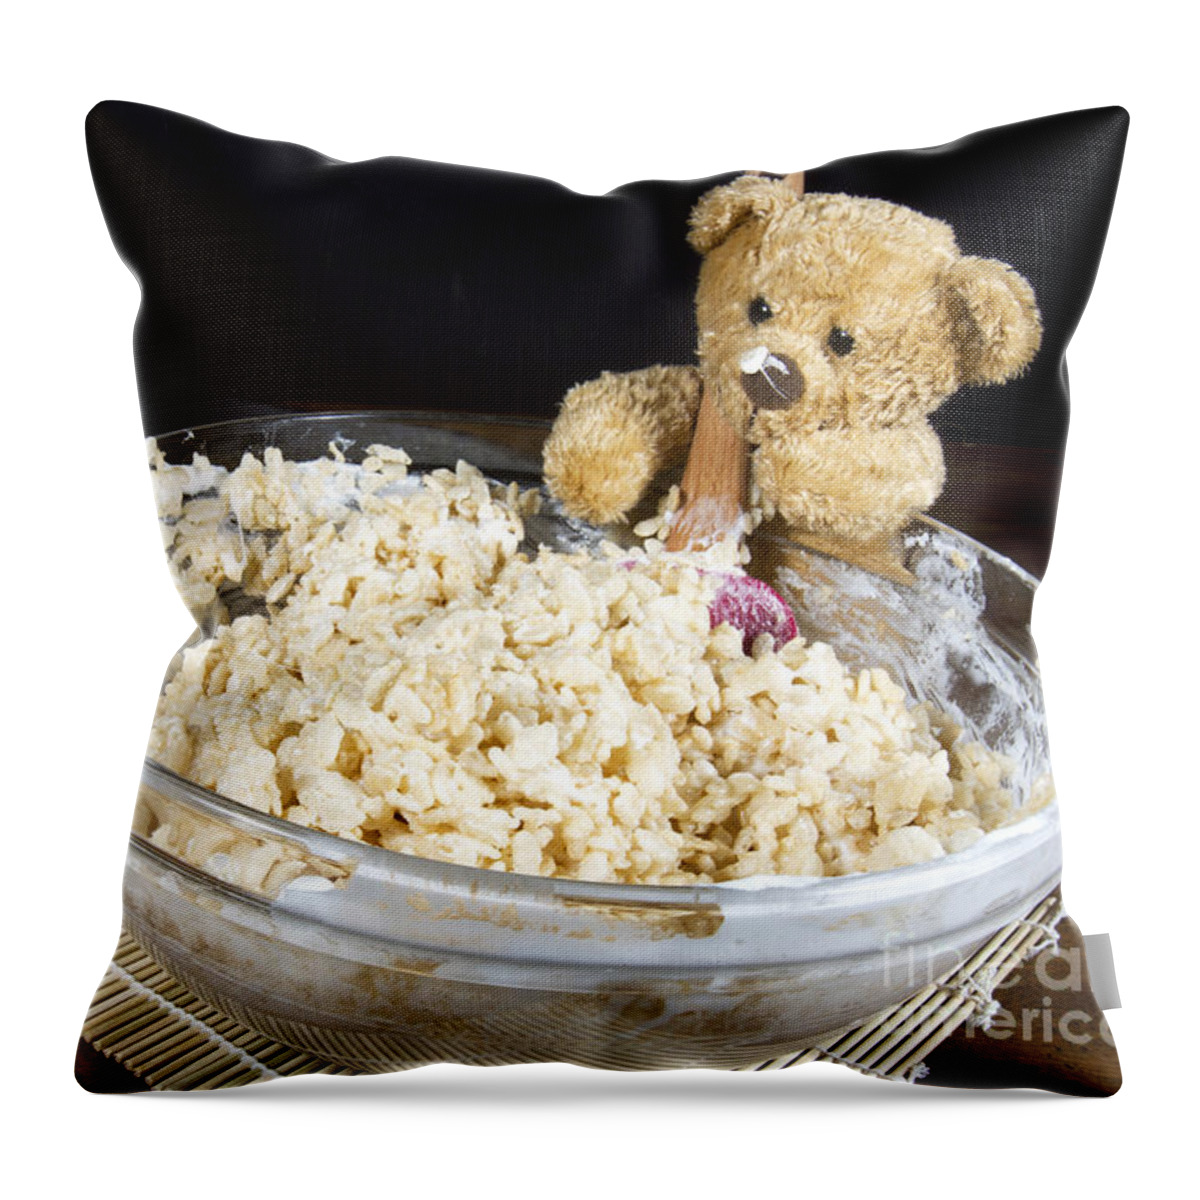 Puffed Rice Cereal Throw Pillow featuring the photograph Bear Making Puffed Rice Cereal Treats by Karen Foley